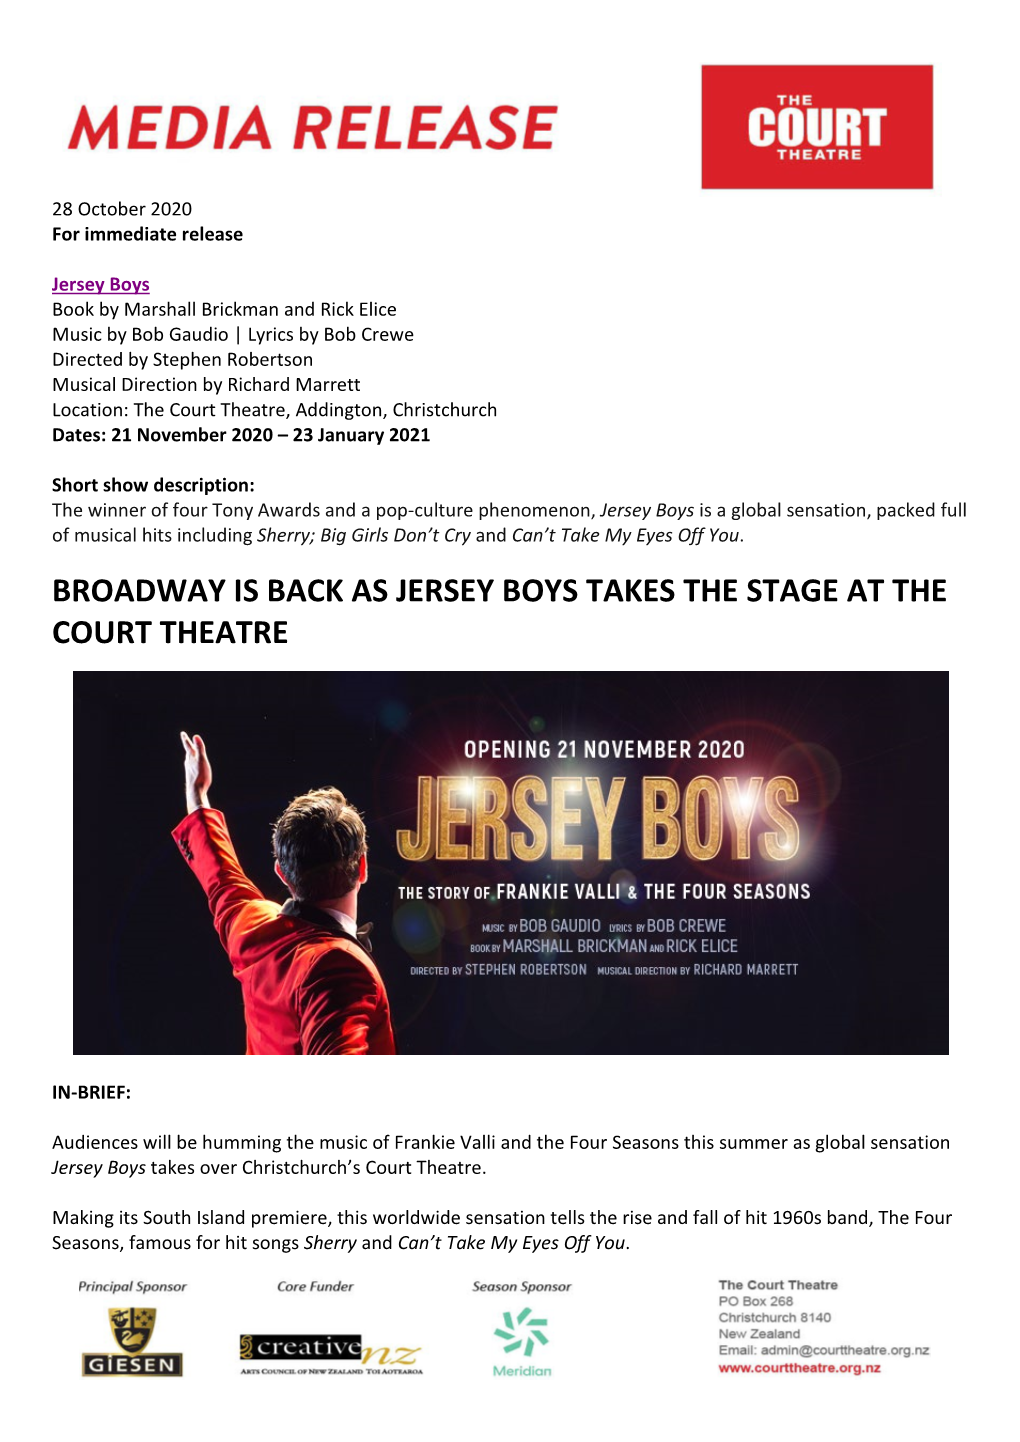 Broadway Is Back As Jersey Boys Takes the Stage at the Court Theatre